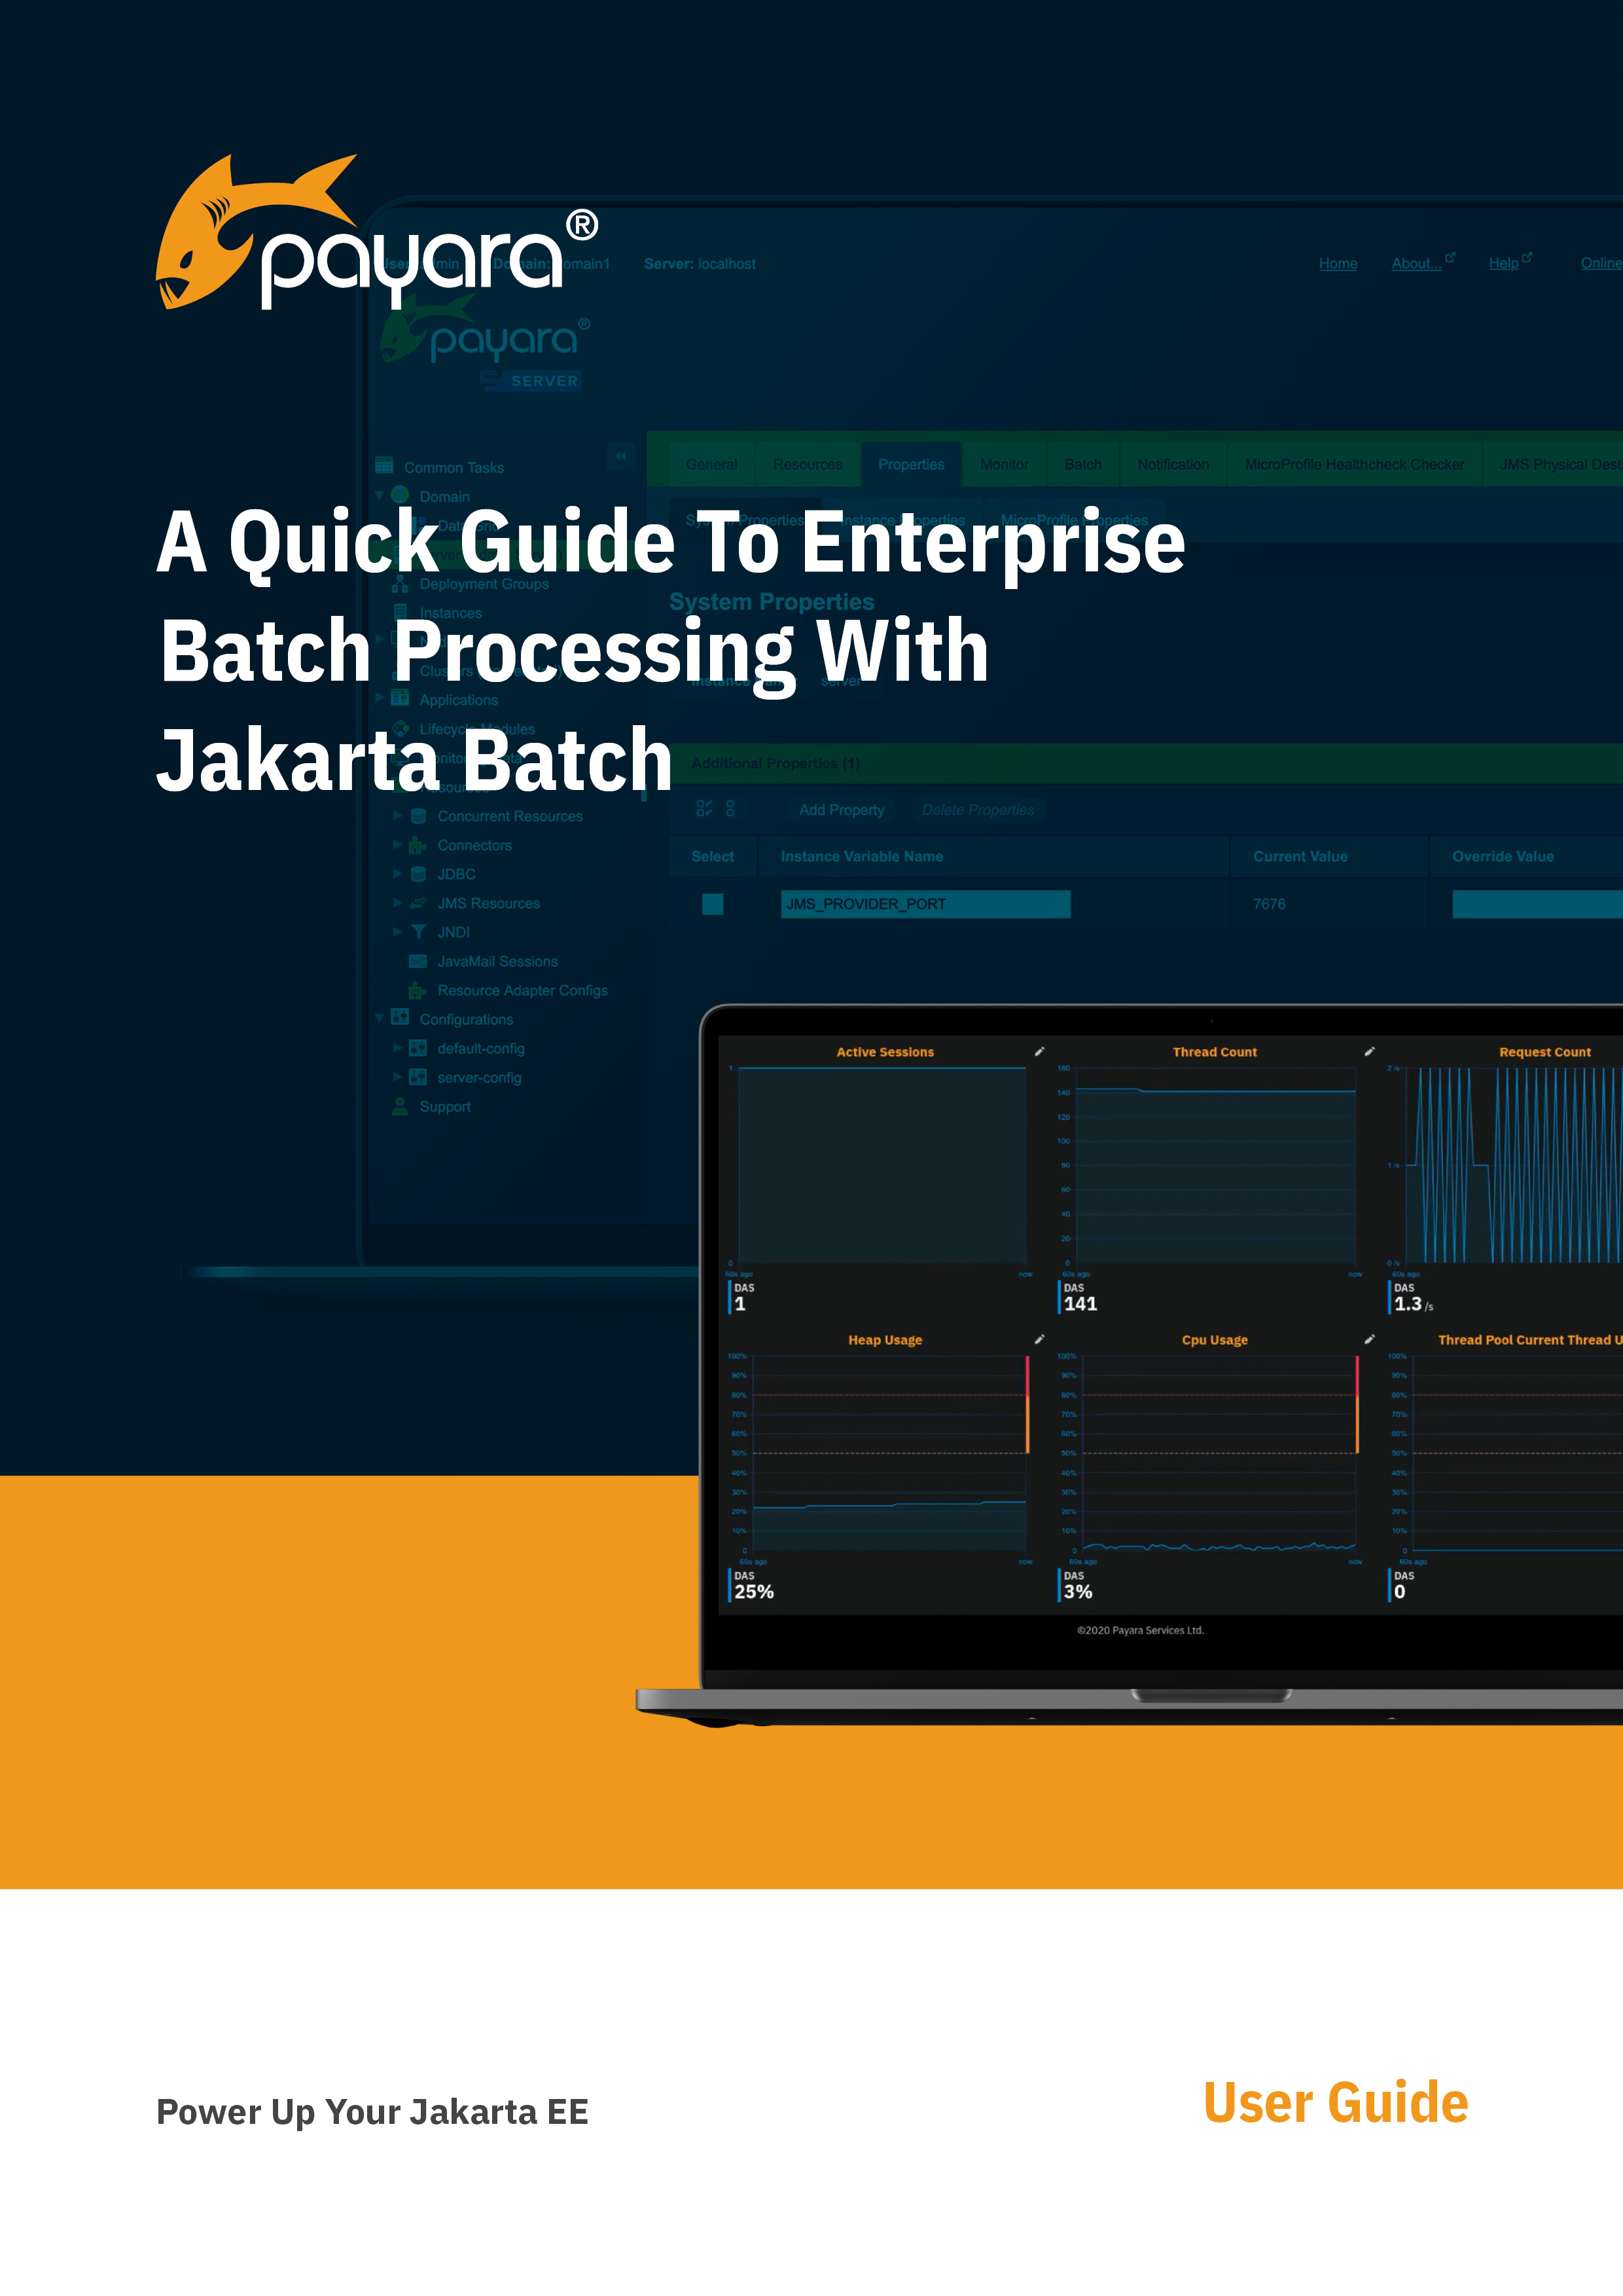 A Quick Guide To Enterprise Batch Processing With Jakarta Batch